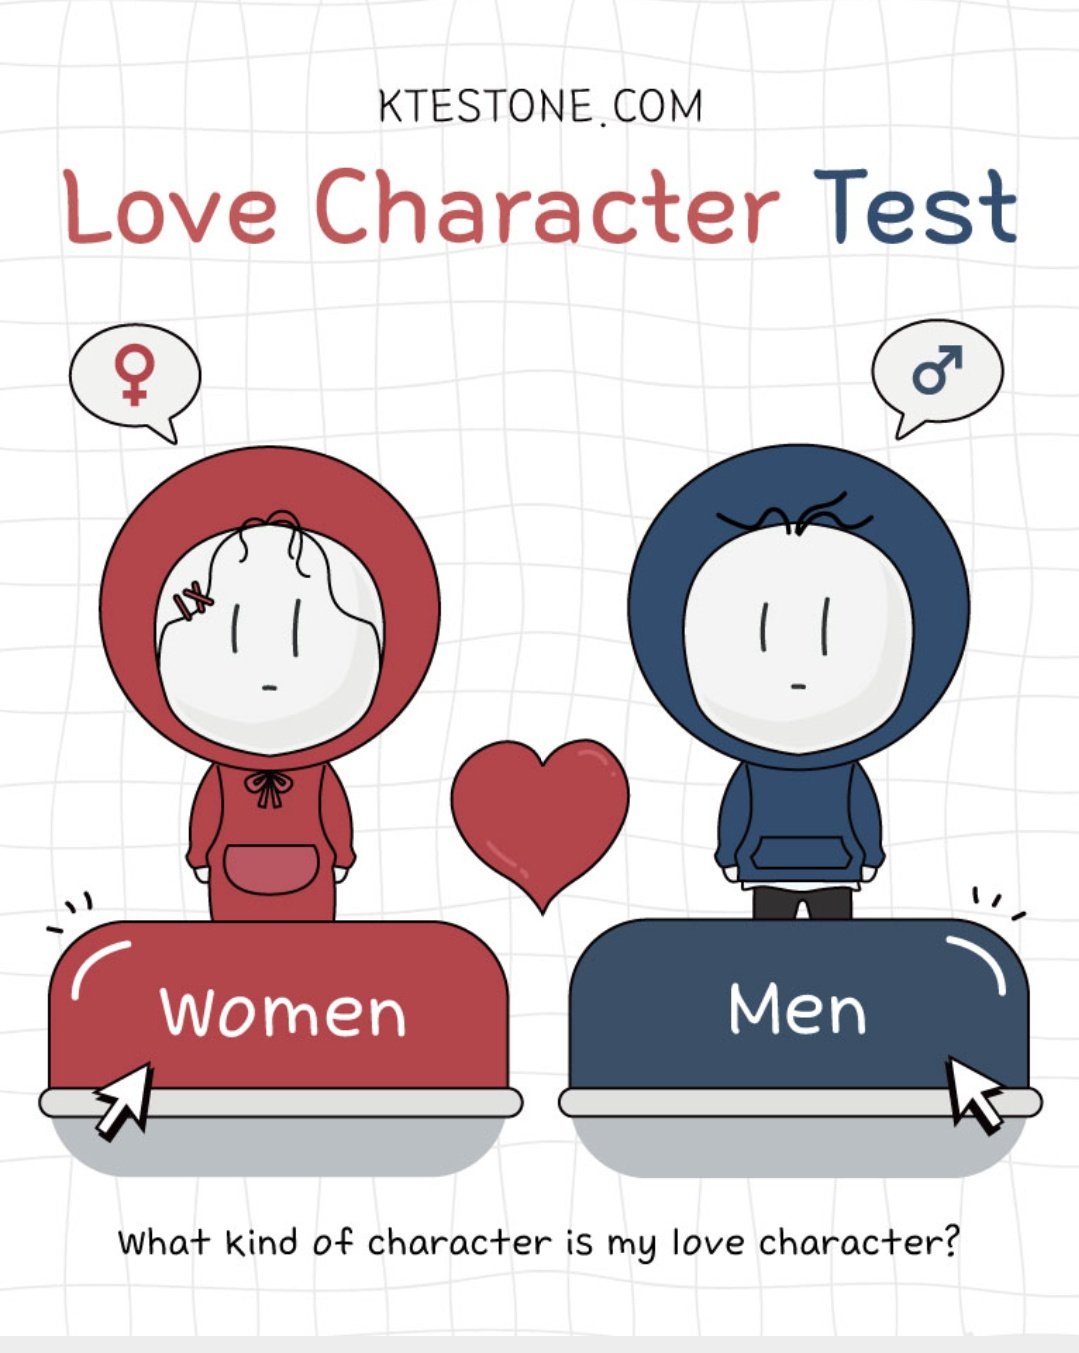 Love character test